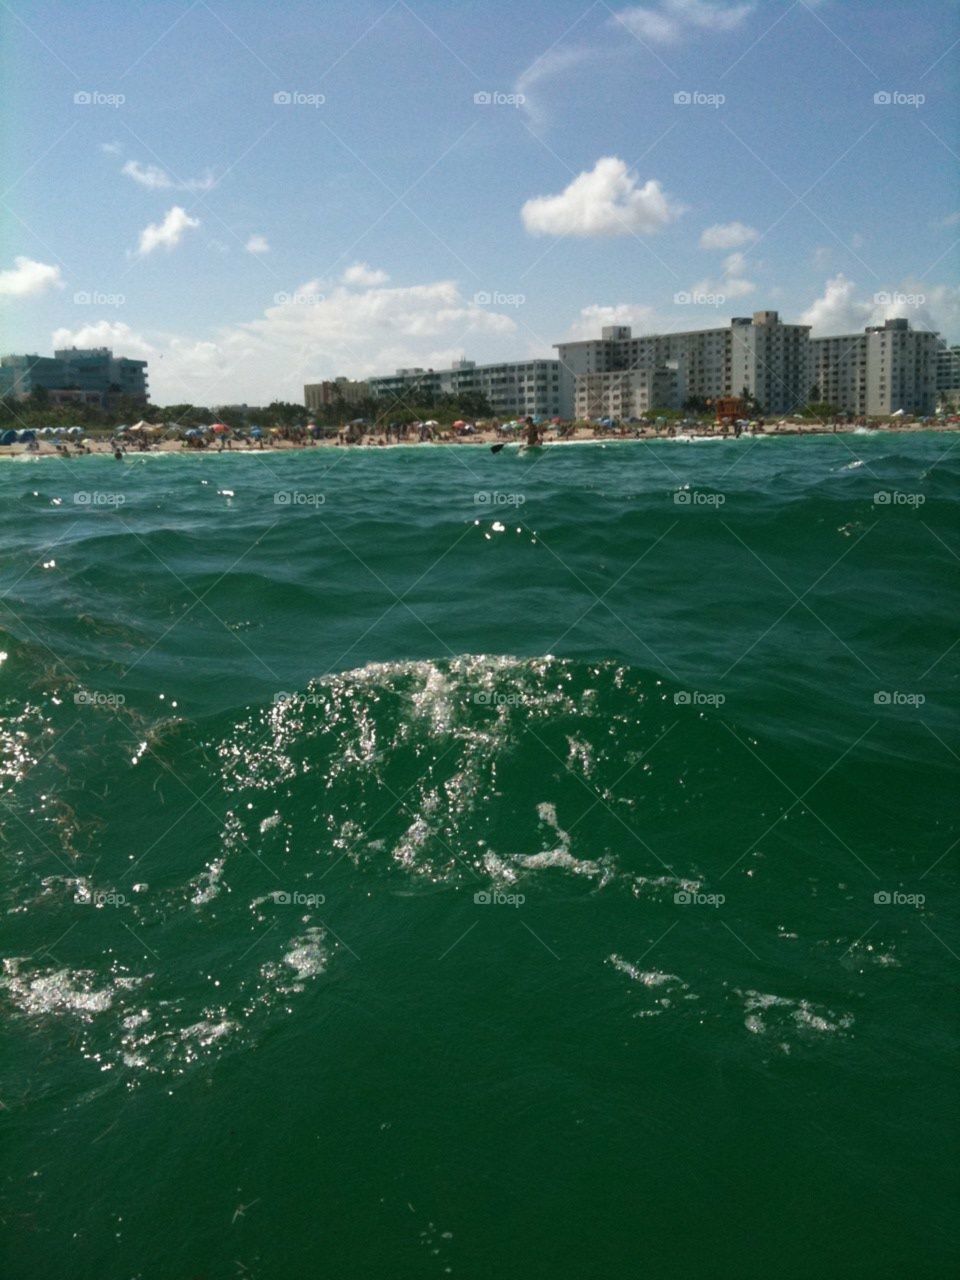 Pov from a paddleboard 